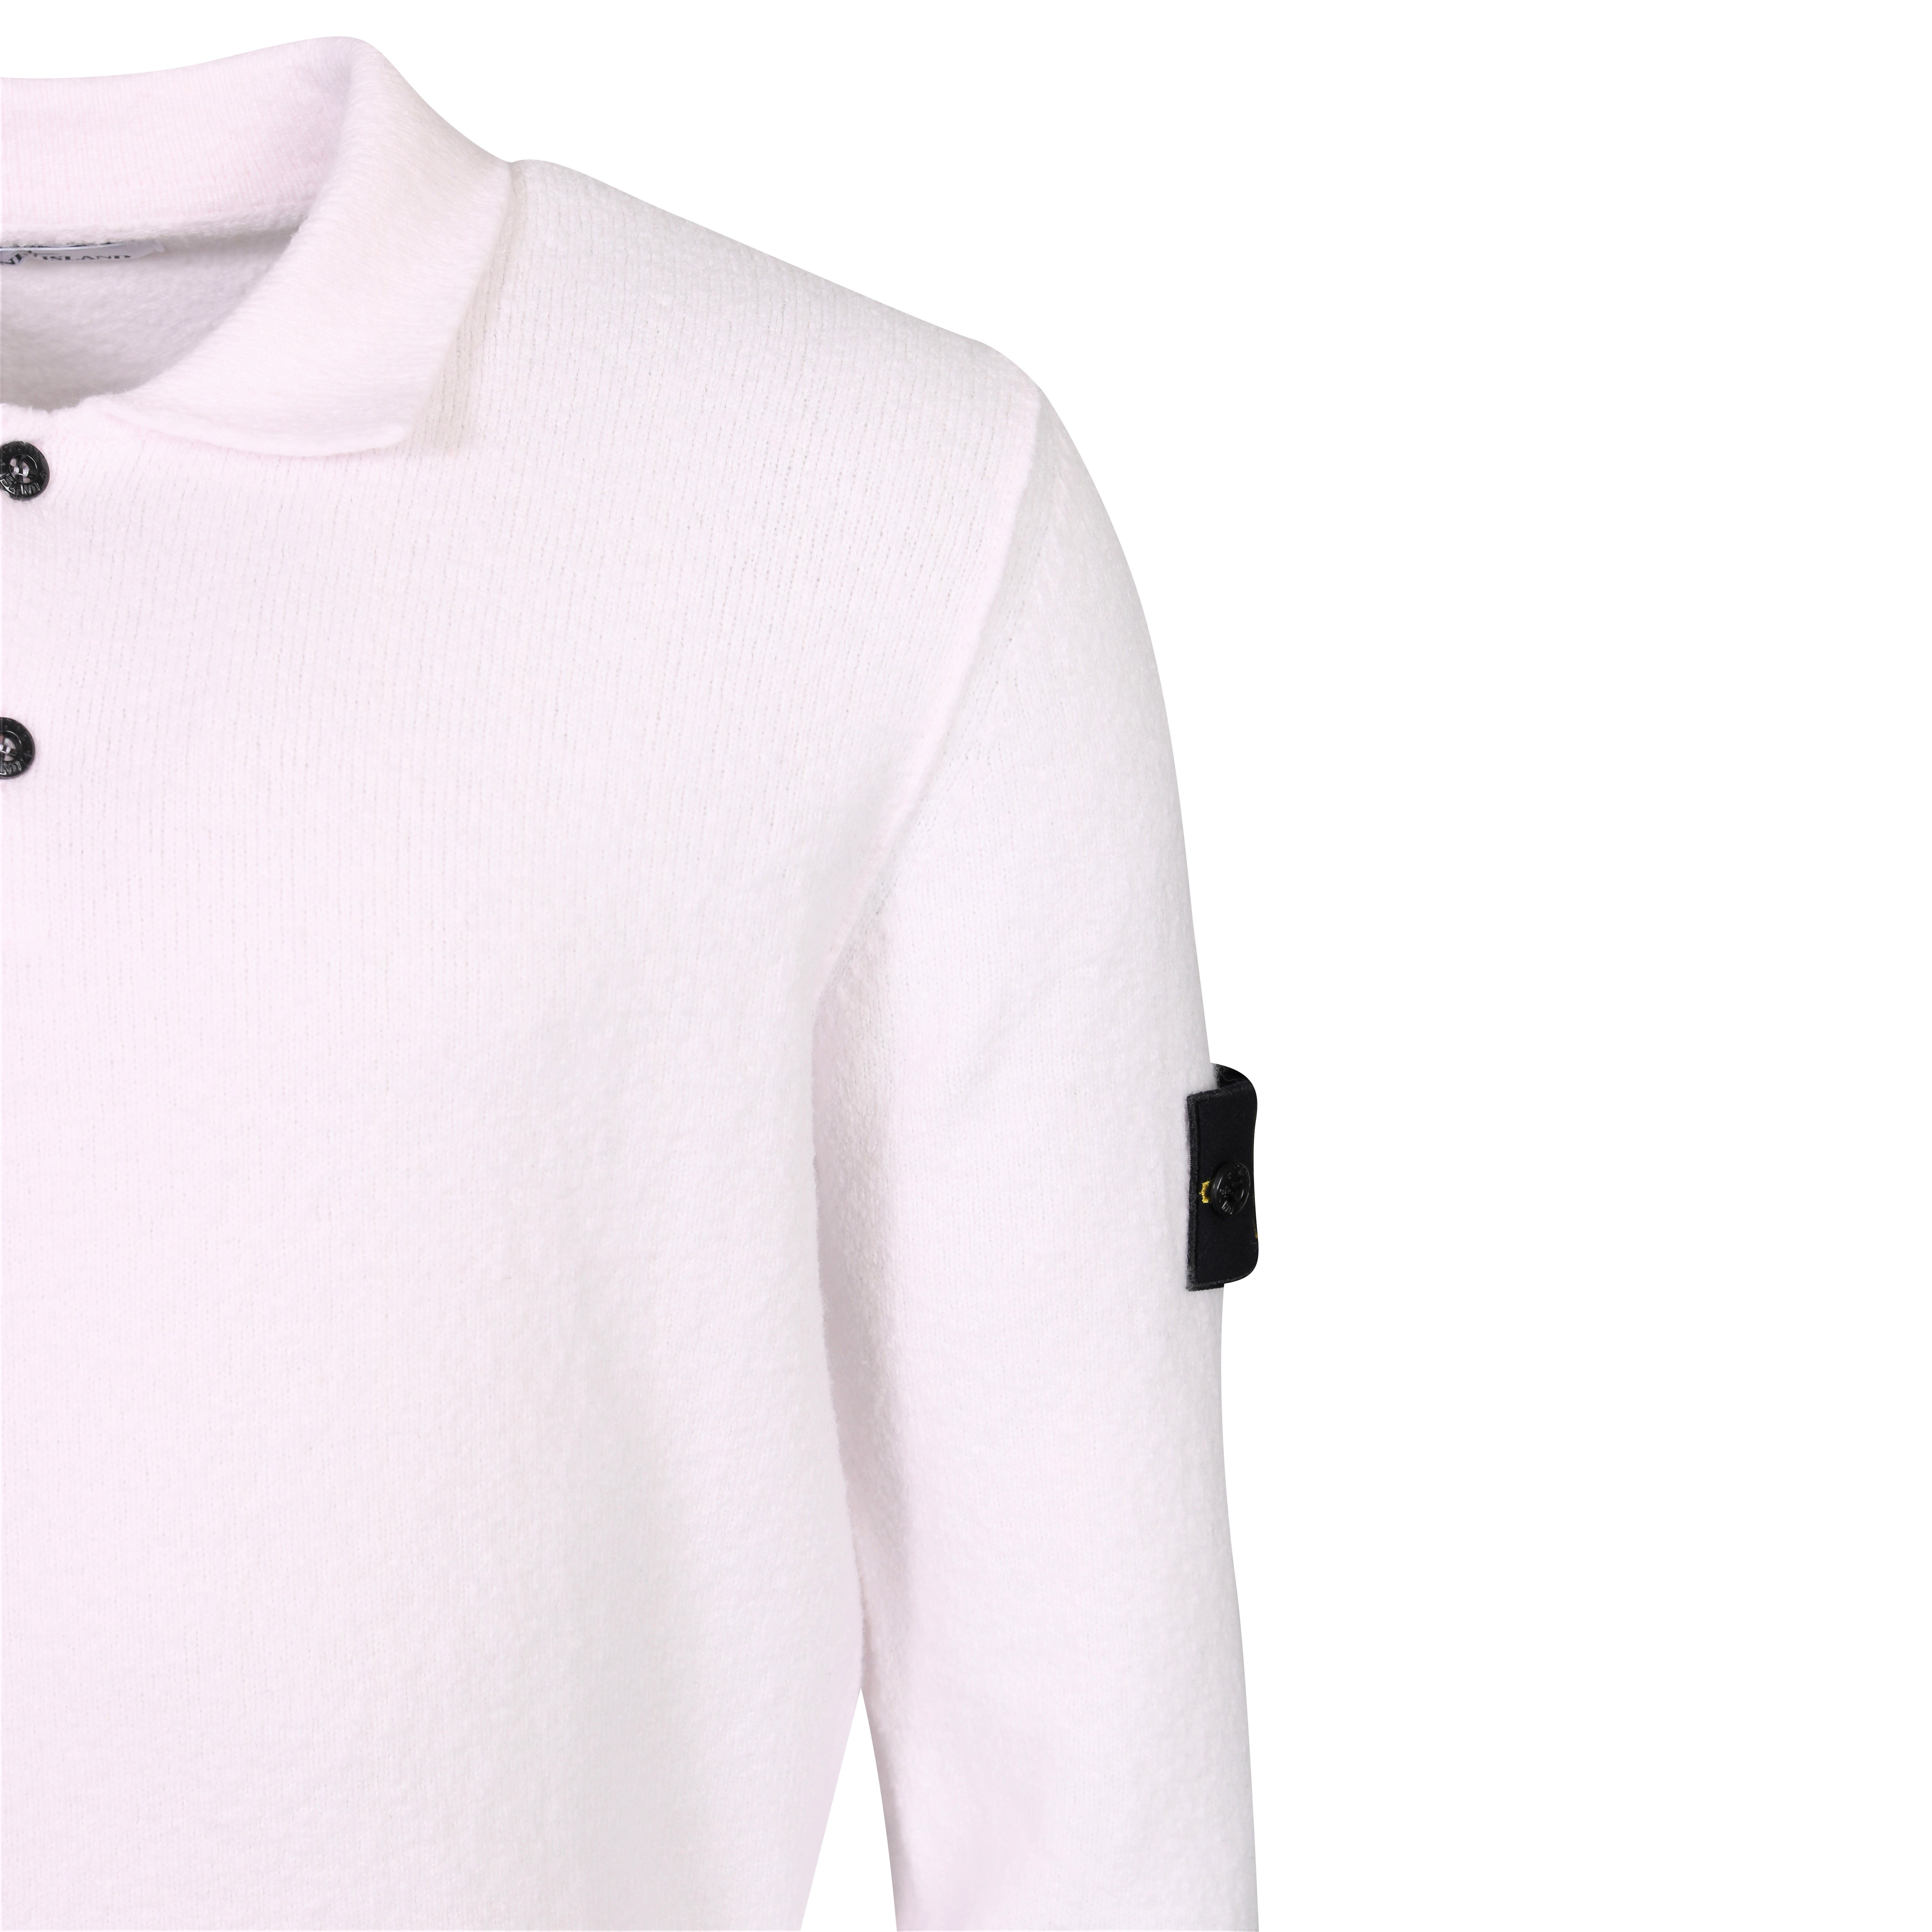 Stone Island Polo Knit Sweater in Light Pink S